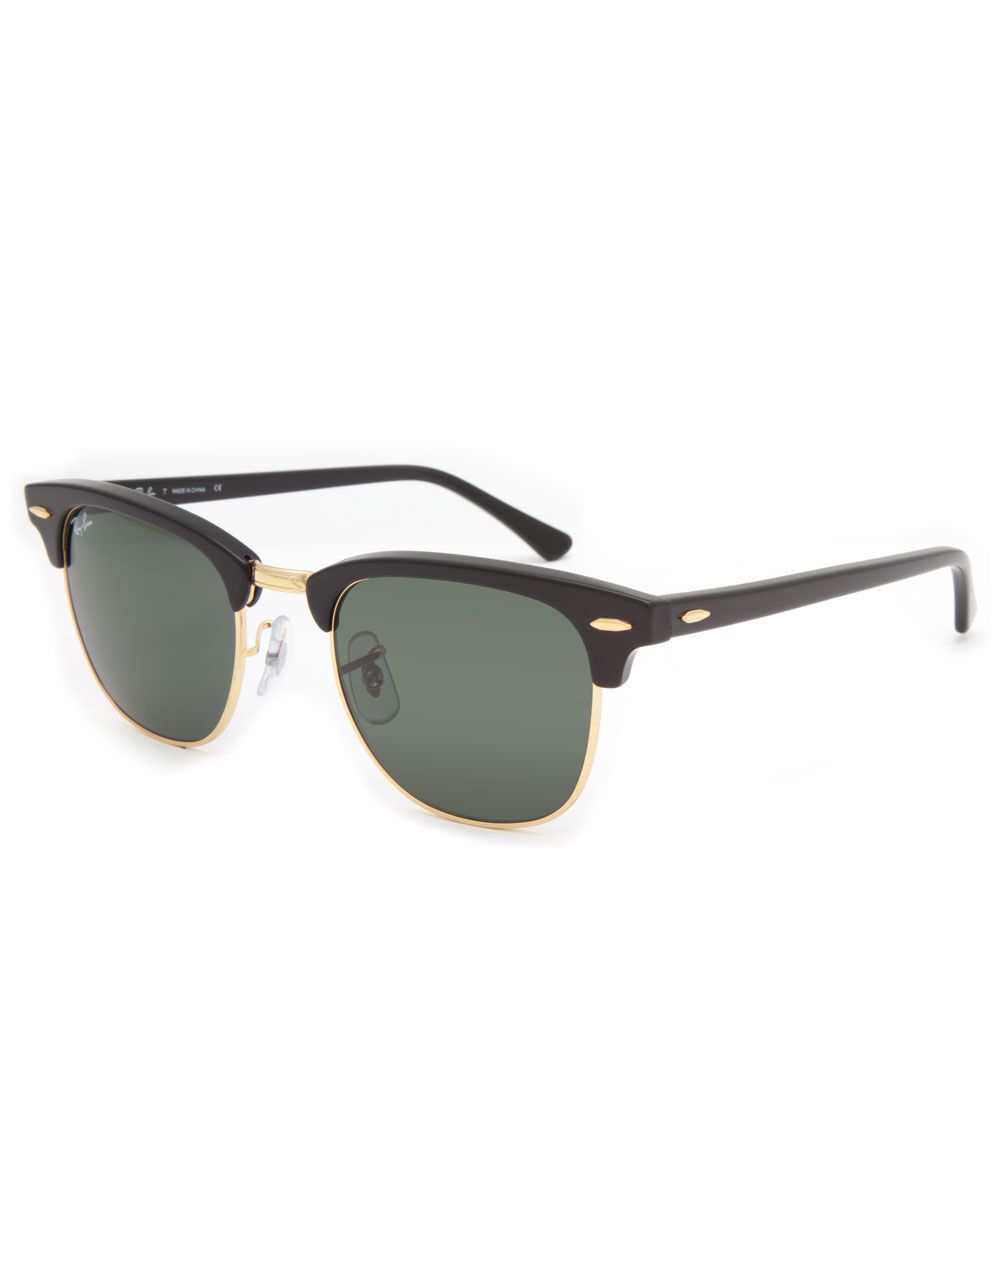 RAY-BAN CLUBMASTER SUNGLASSES | Tillys